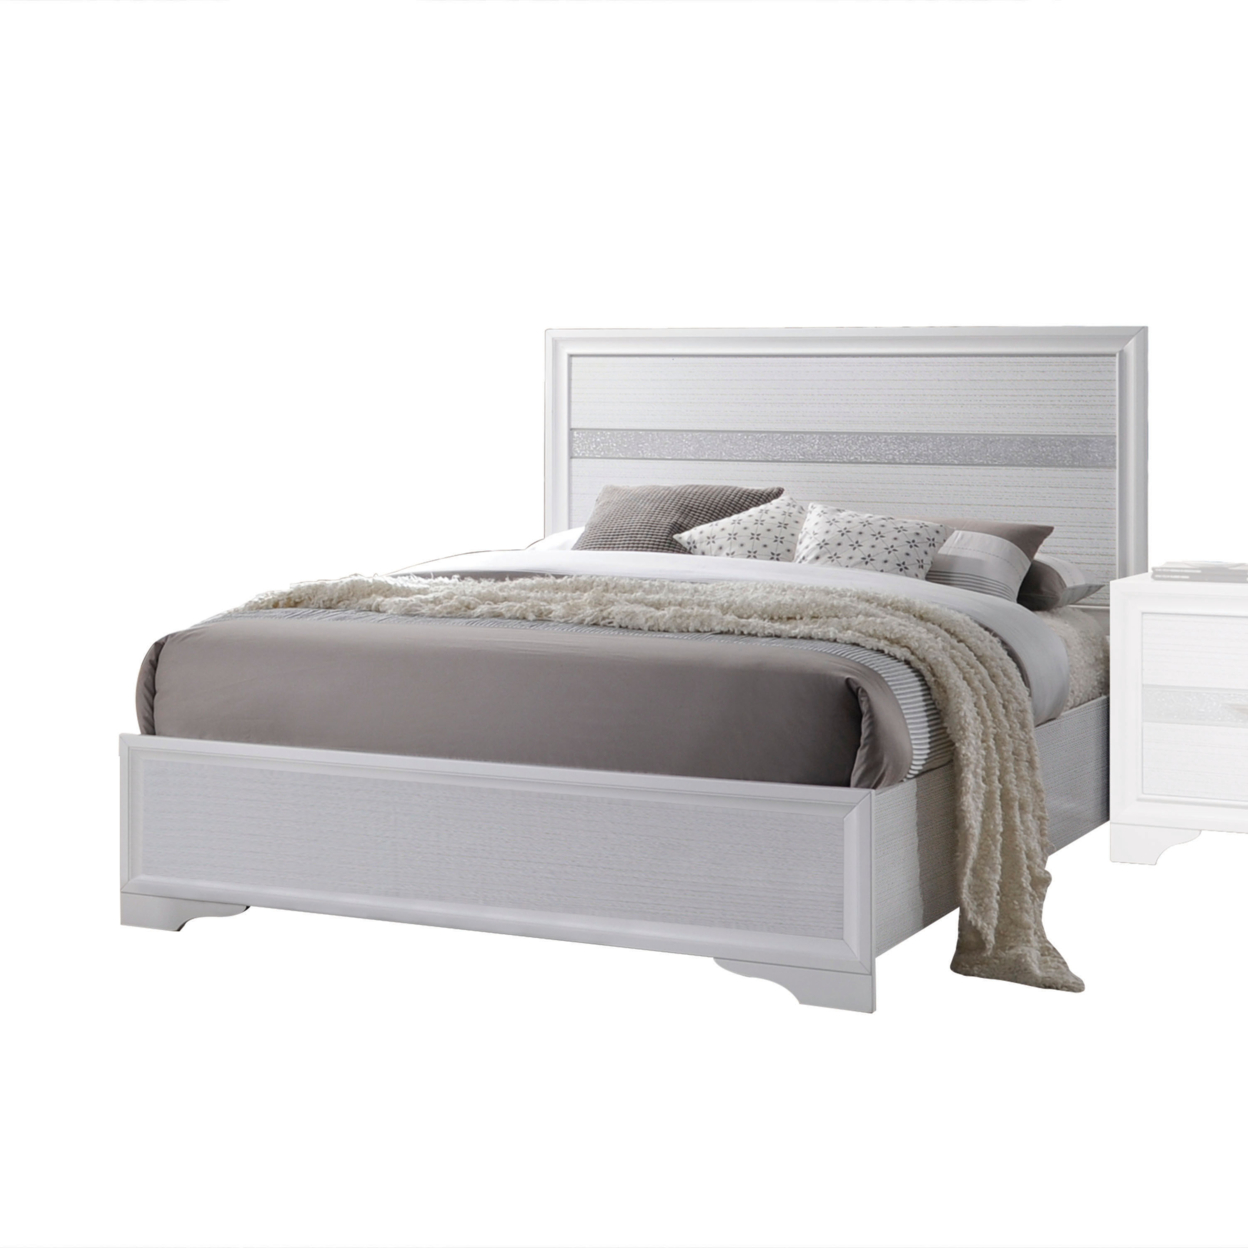 Panel Design Full Bed With Acrylic Trim Accents And Bracket Feet, White- Saltoro Sherpi